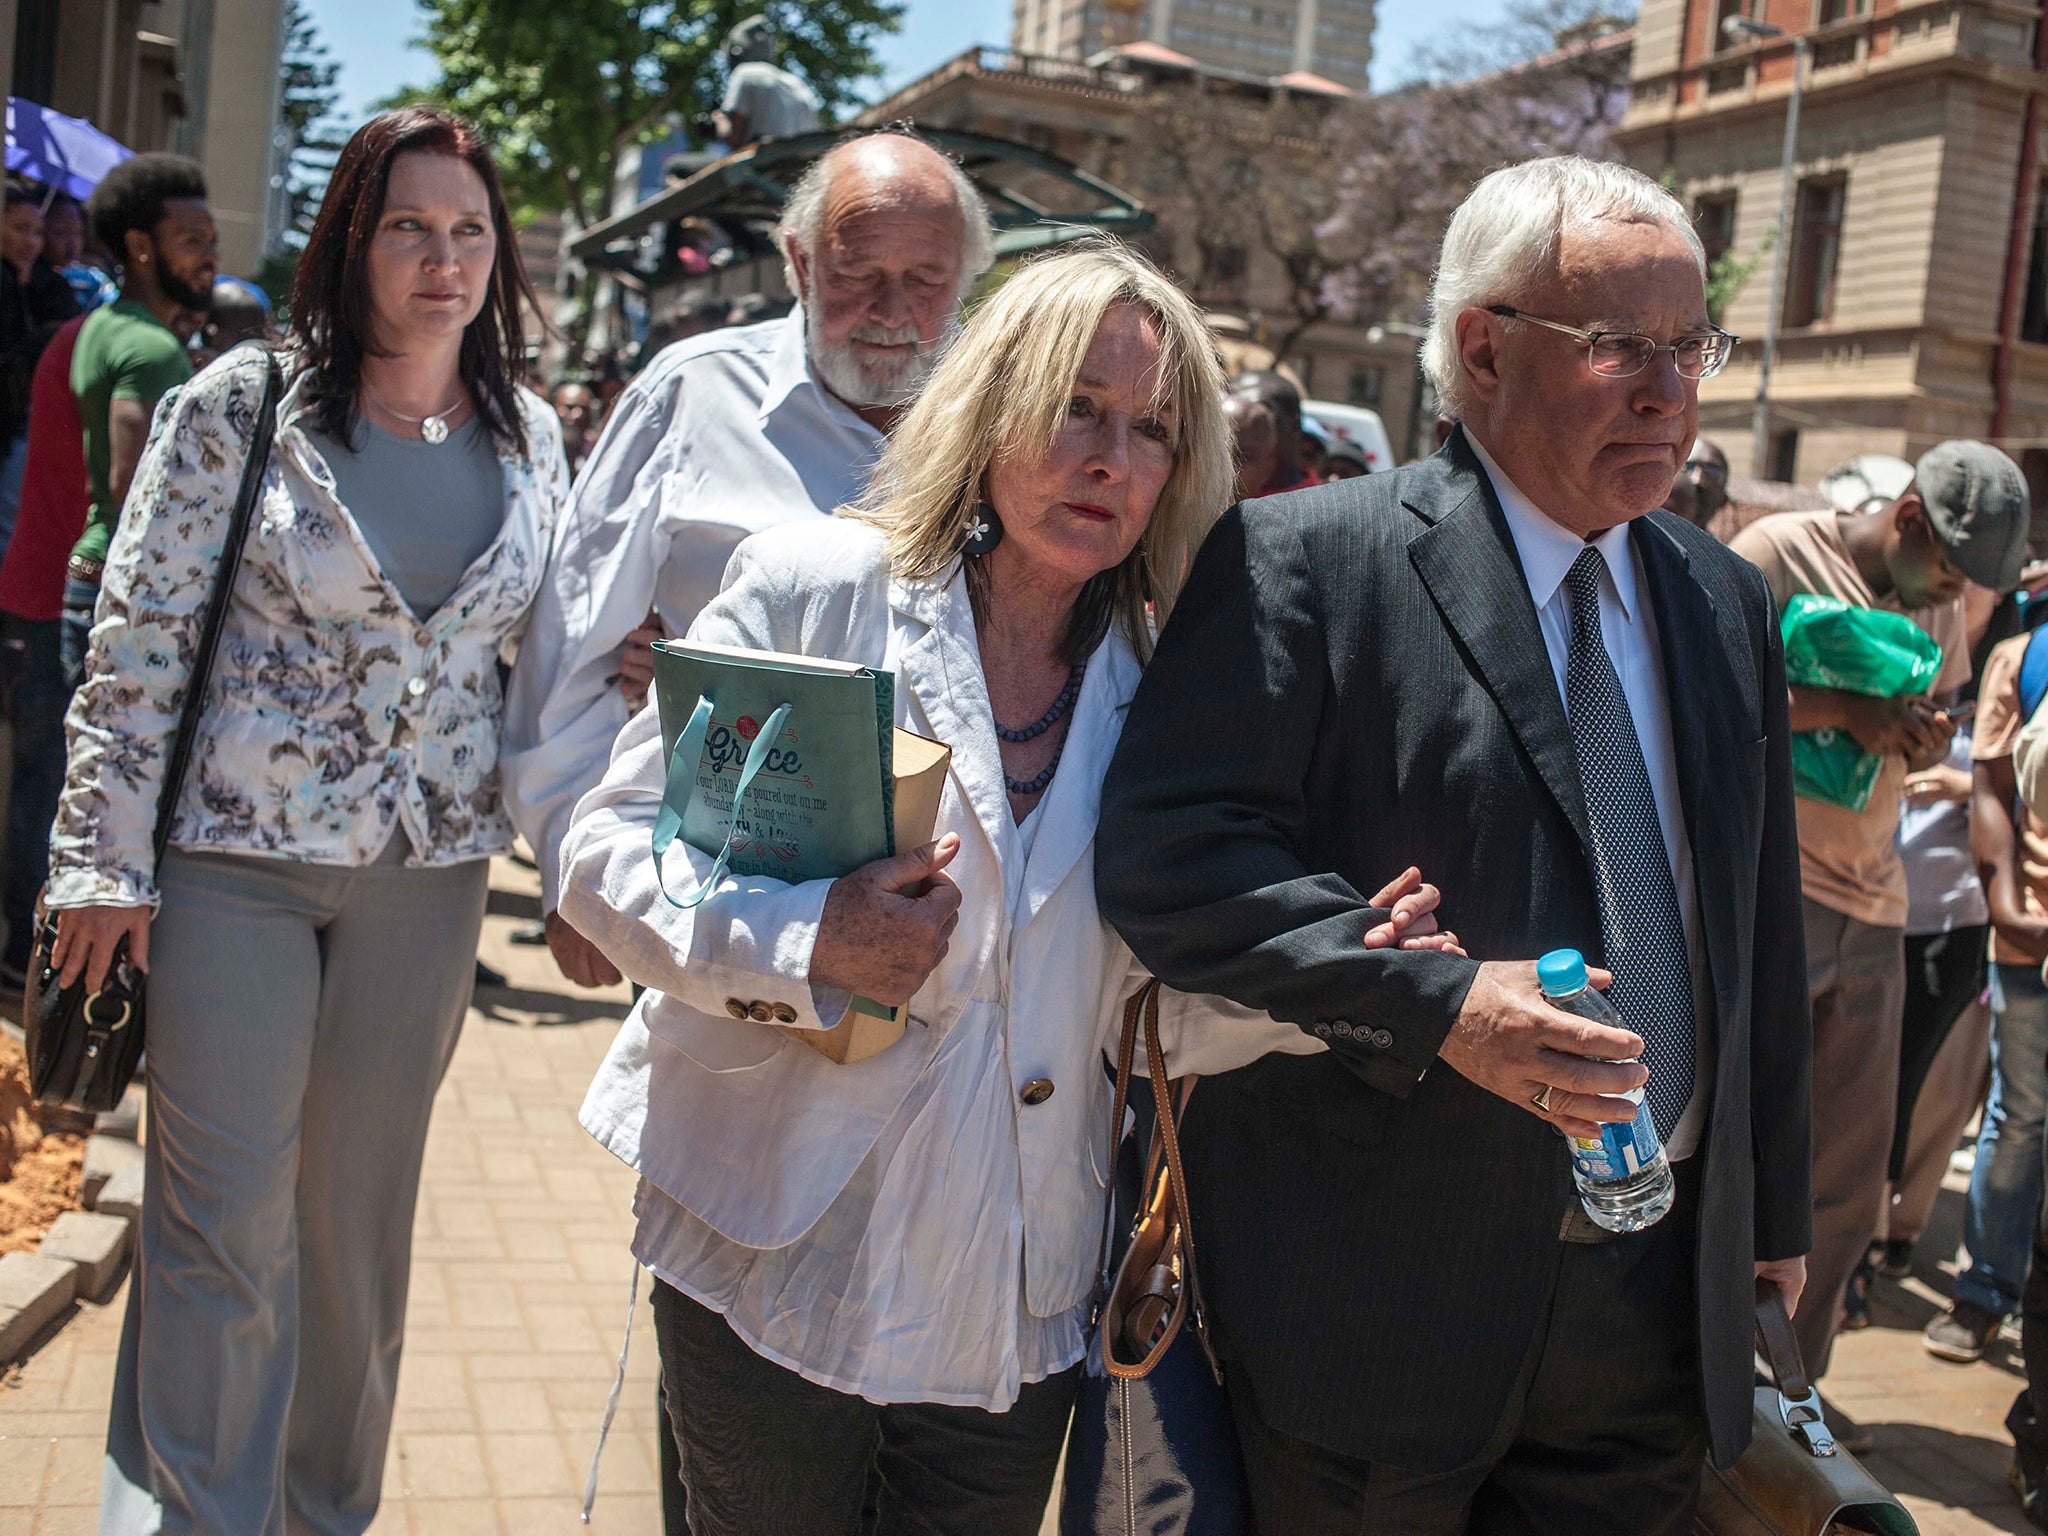 Parents of Reeva Steenkamp leave the High Court in Pretoria after Oscar Pistorius was sentenced to 5 years in prison